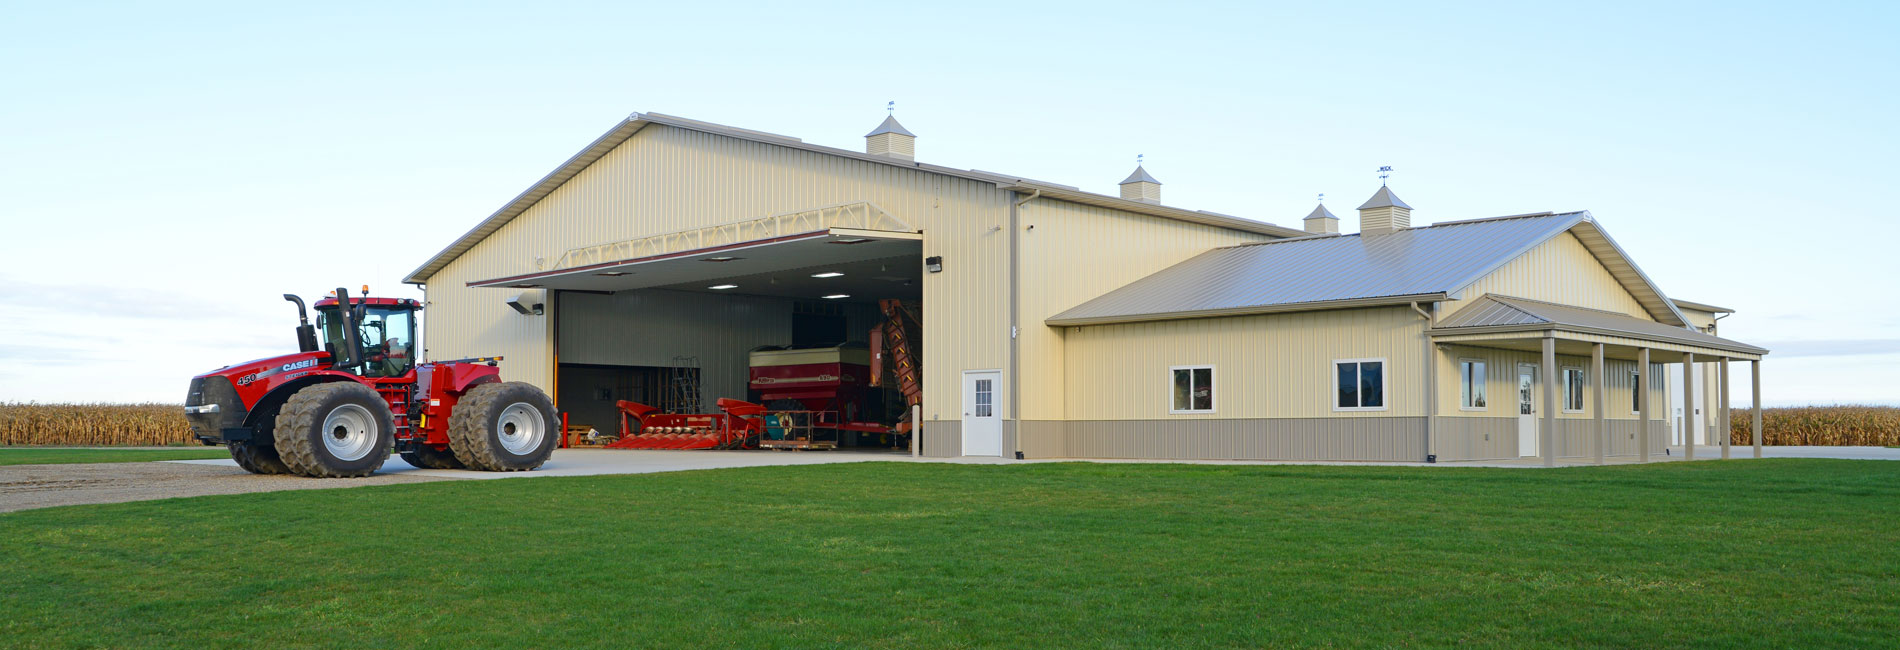 Agricultural Buildings, Machine Sheds, Pole Barns, and Livestock.